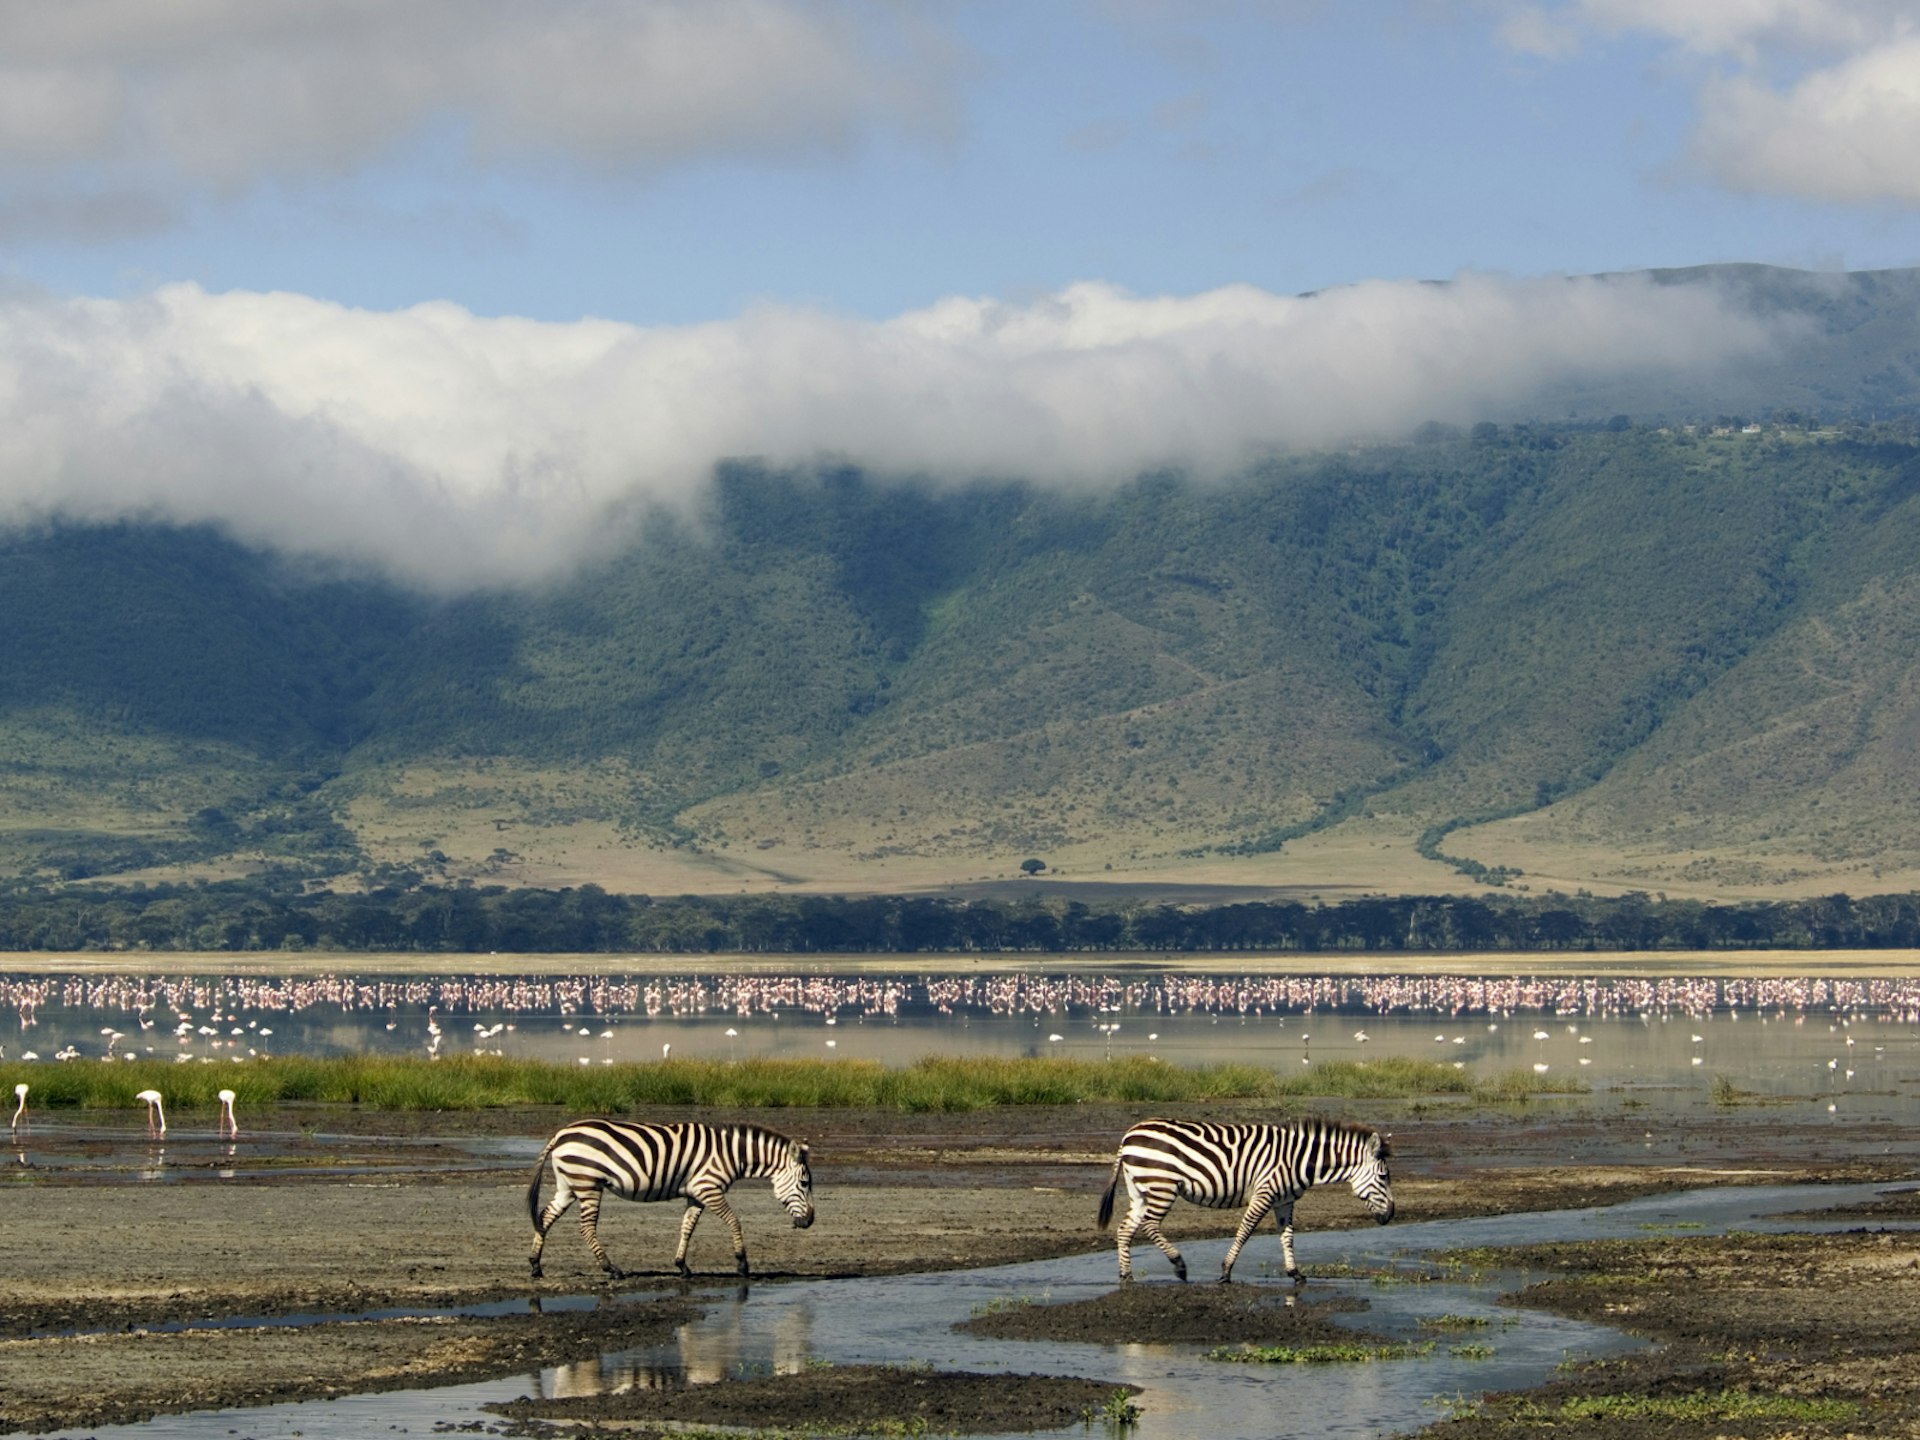 Two zebras walk through water in the foreground. A host of flamingos can be seen in a lake in the distance.